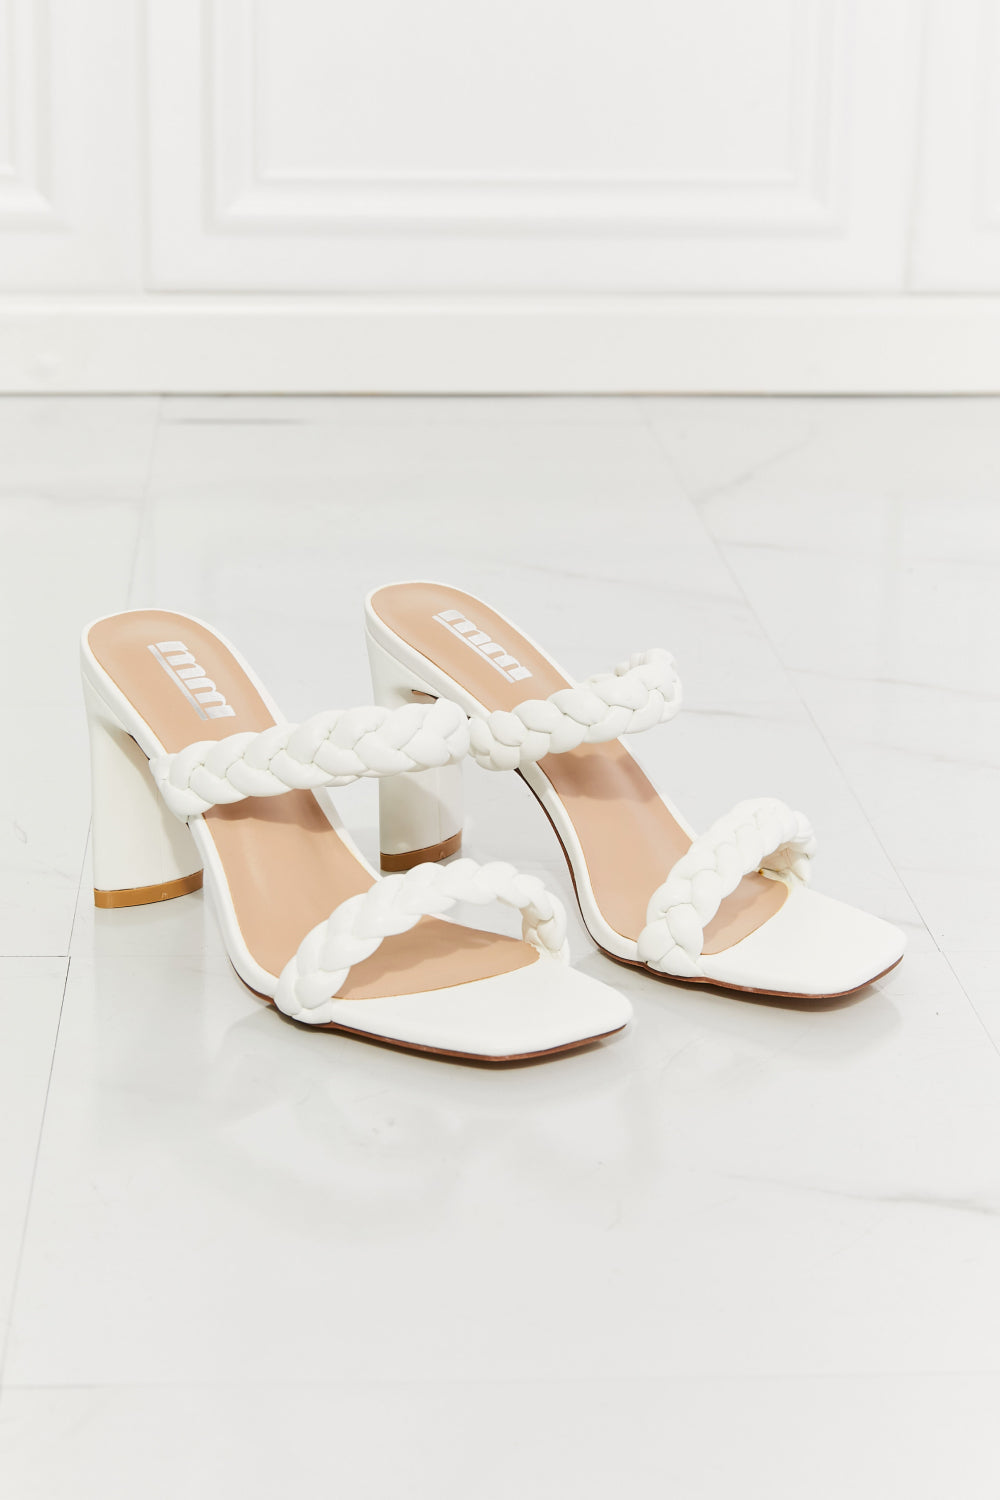 MMShoes In Love Double Braided Block Heel Sandal in White Print on any thing USA/STOD clothes